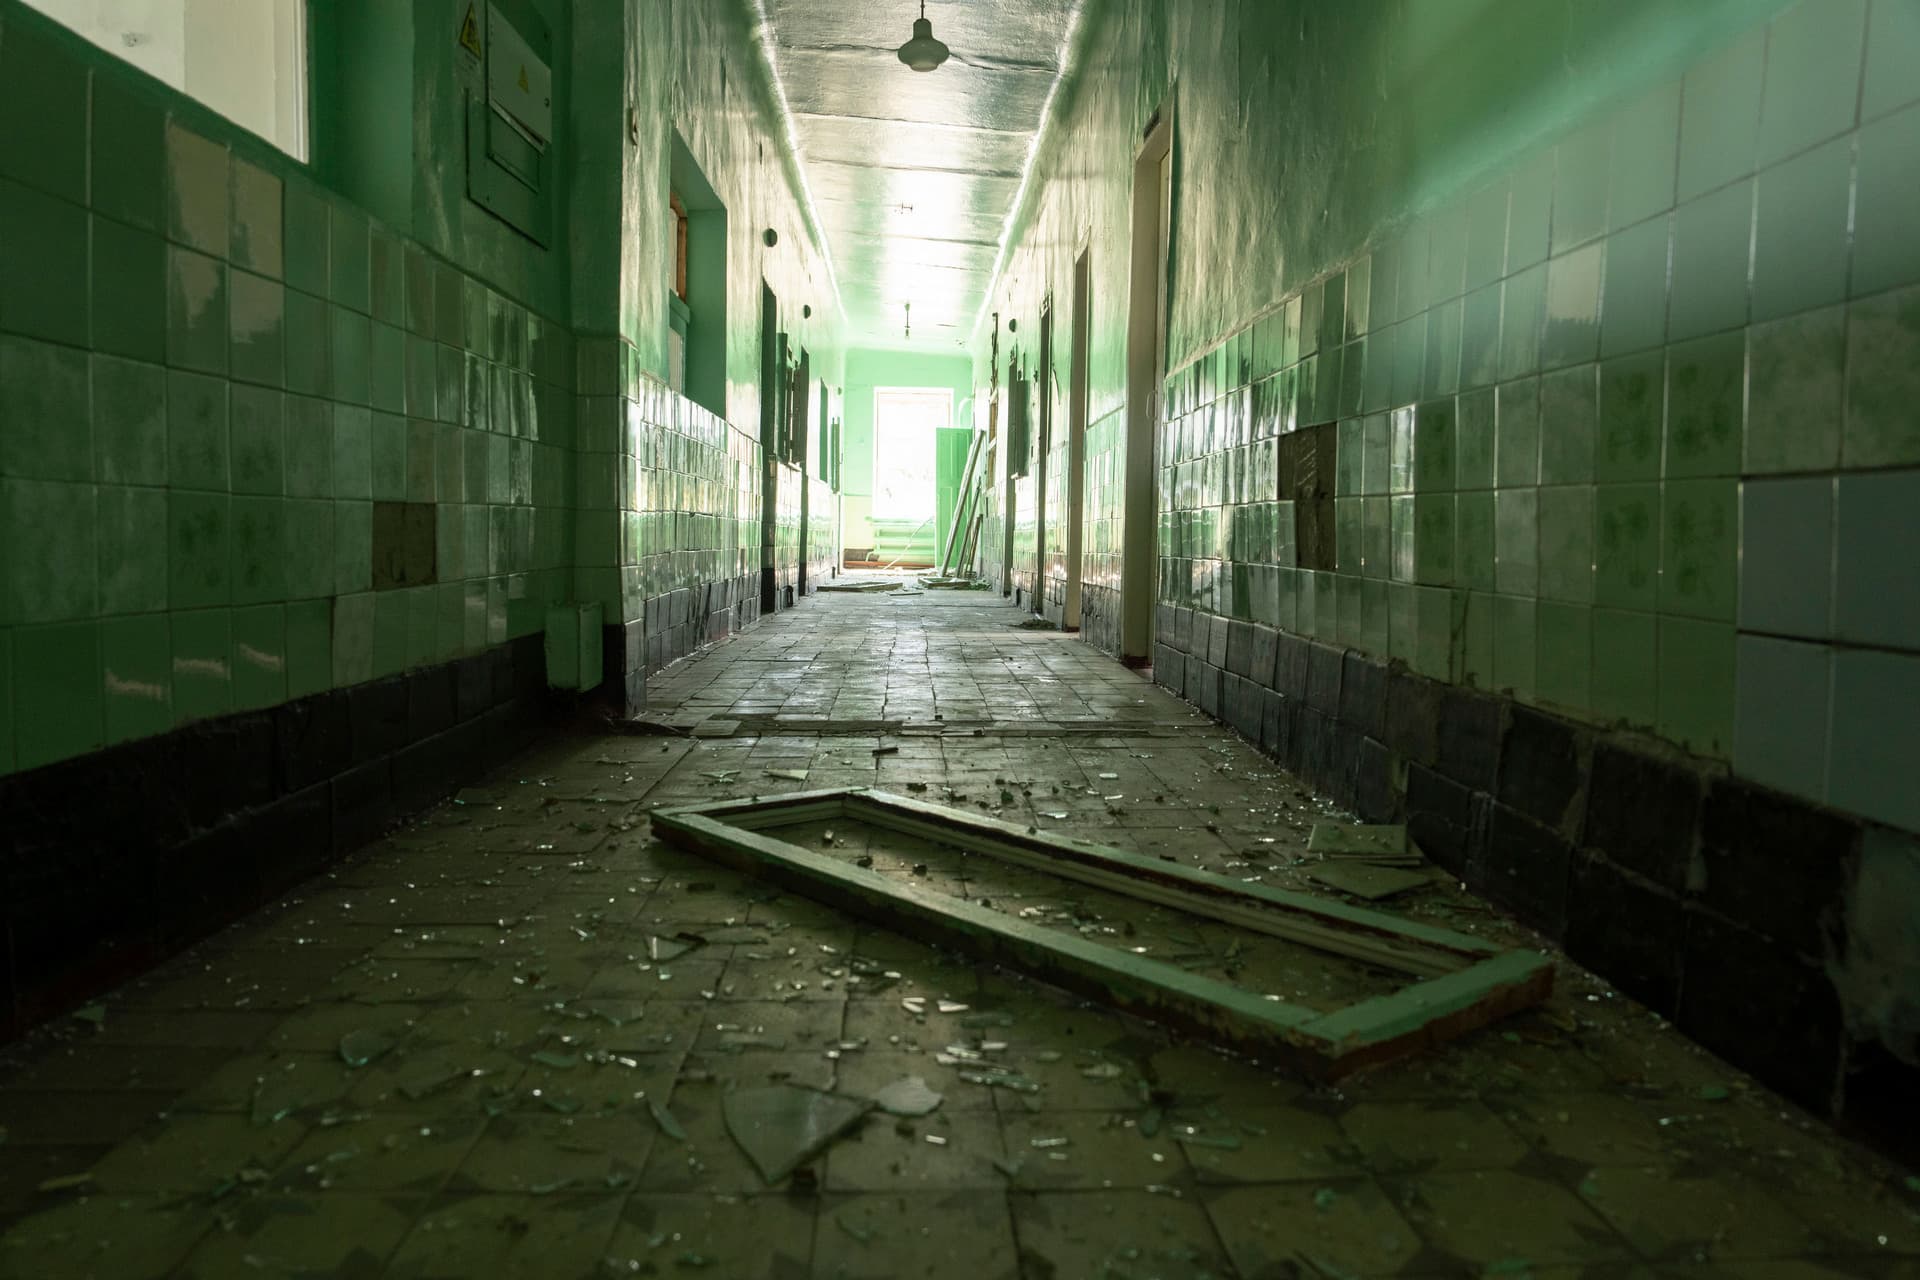 Debris and broken glass is scattered on the floor of the damaged infectious illness department after a Russia attack at the hospital in Zolochiv